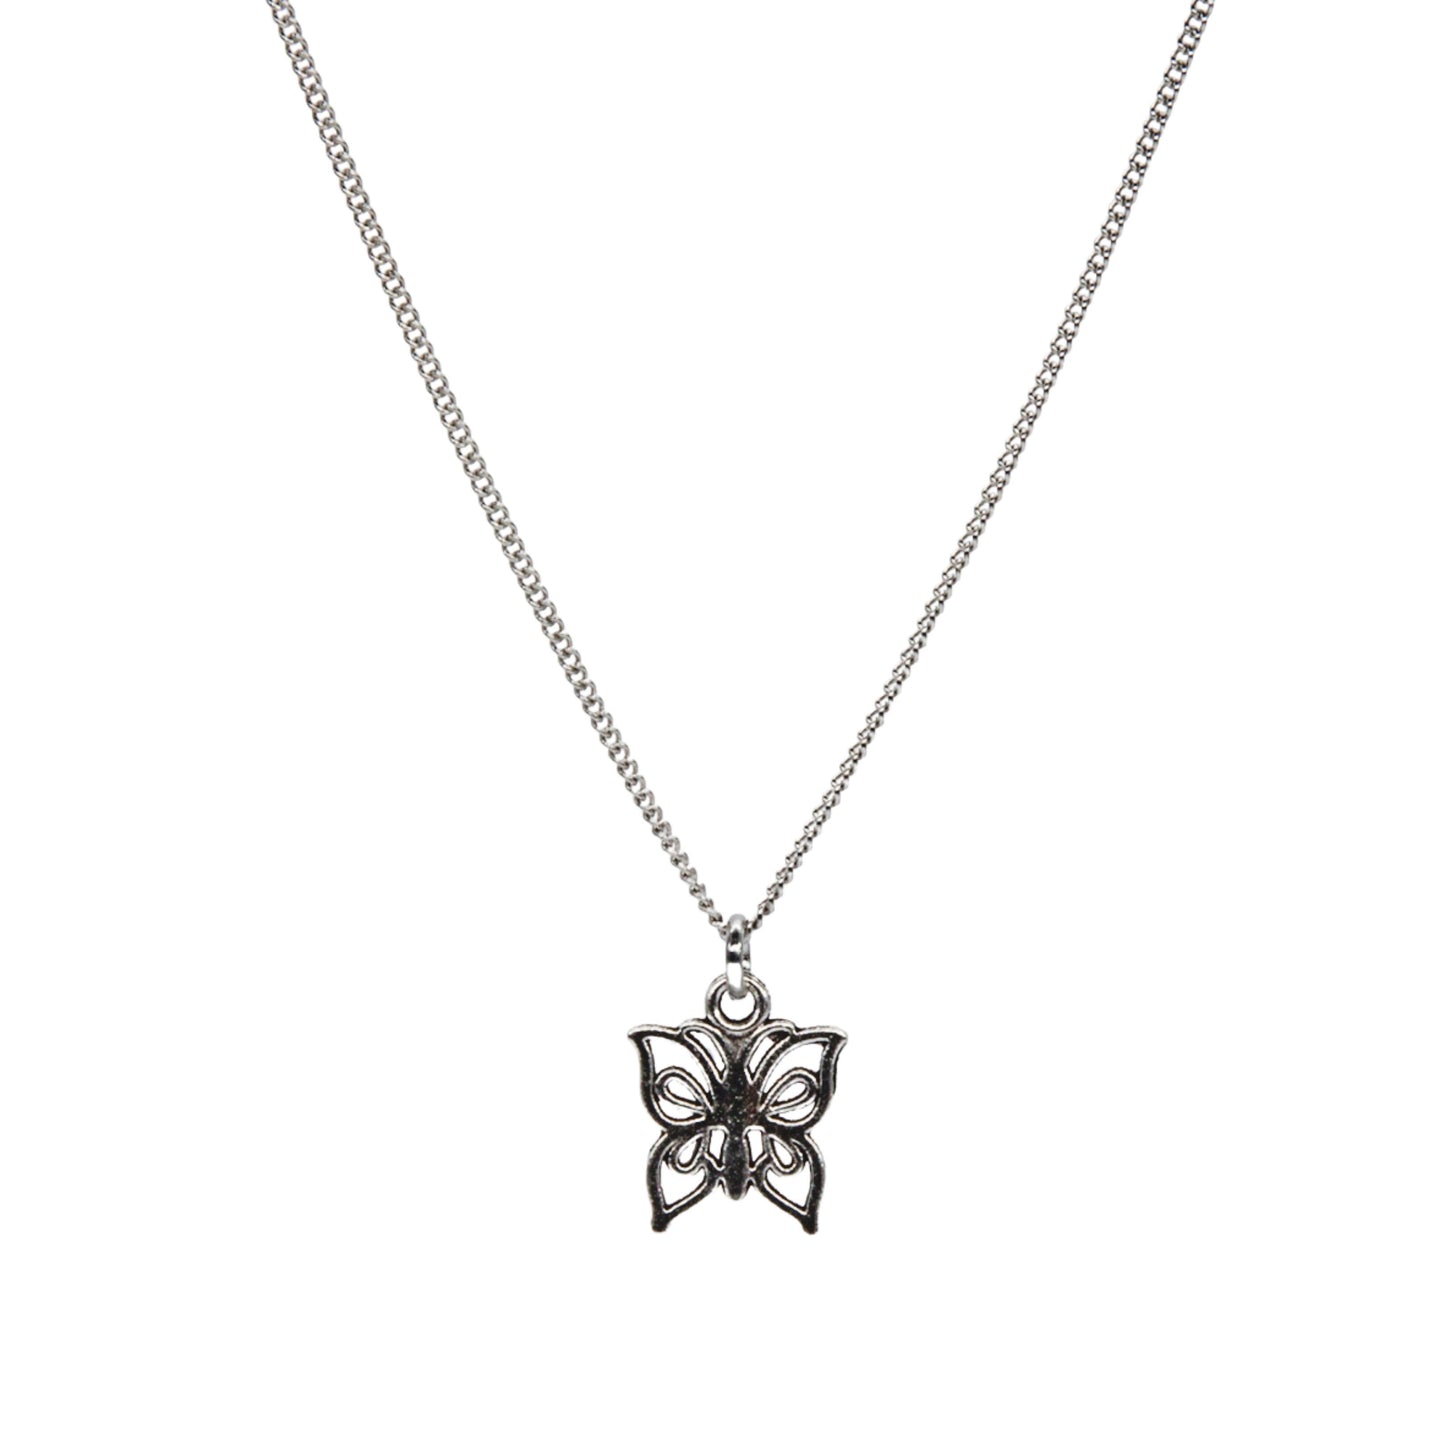 Silver Butterfly Necklace - Adjustable Length